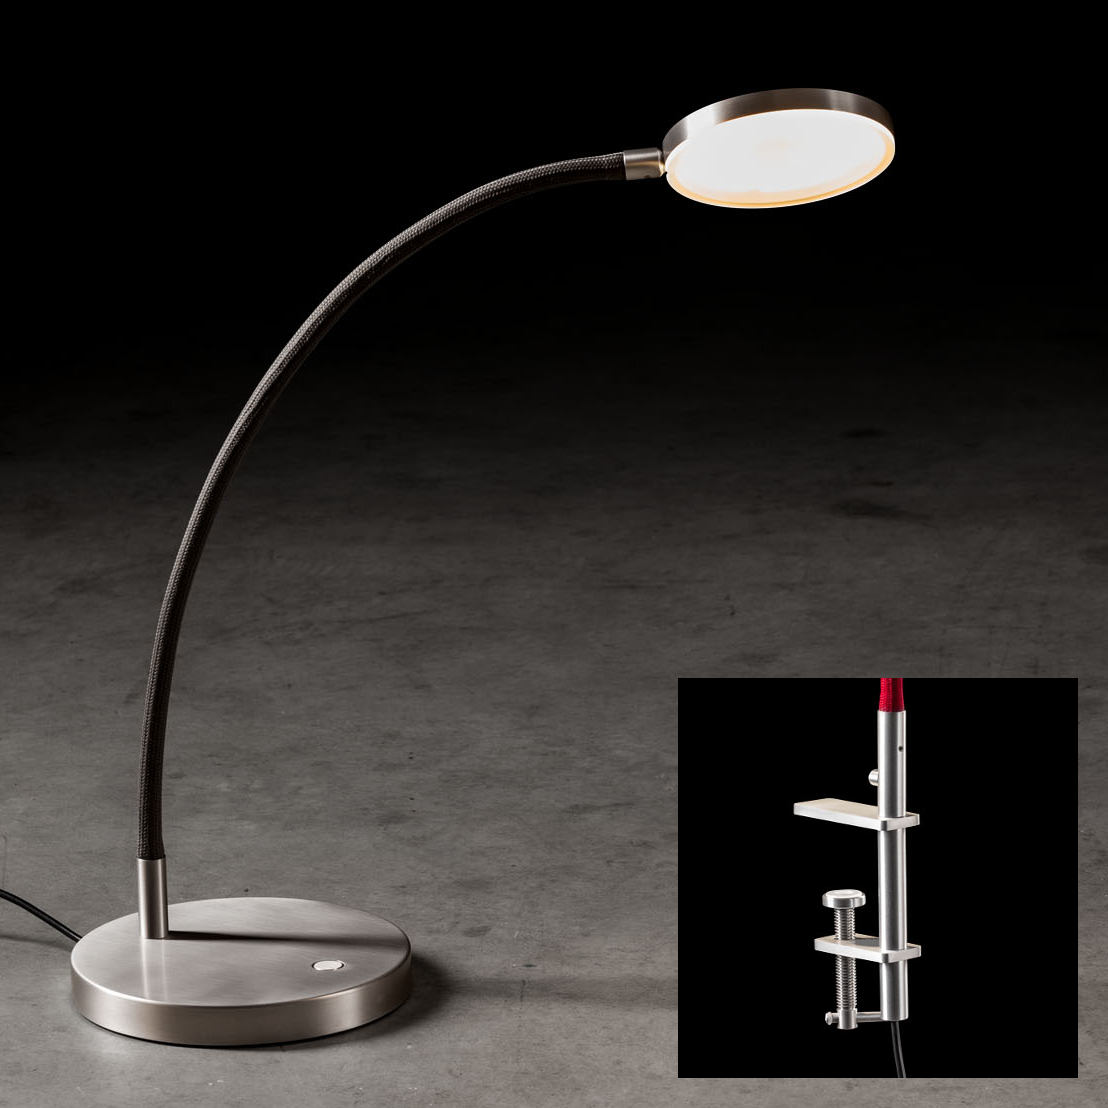 Flex Arm Table Light Reading Light Flex T K With Round Base Or